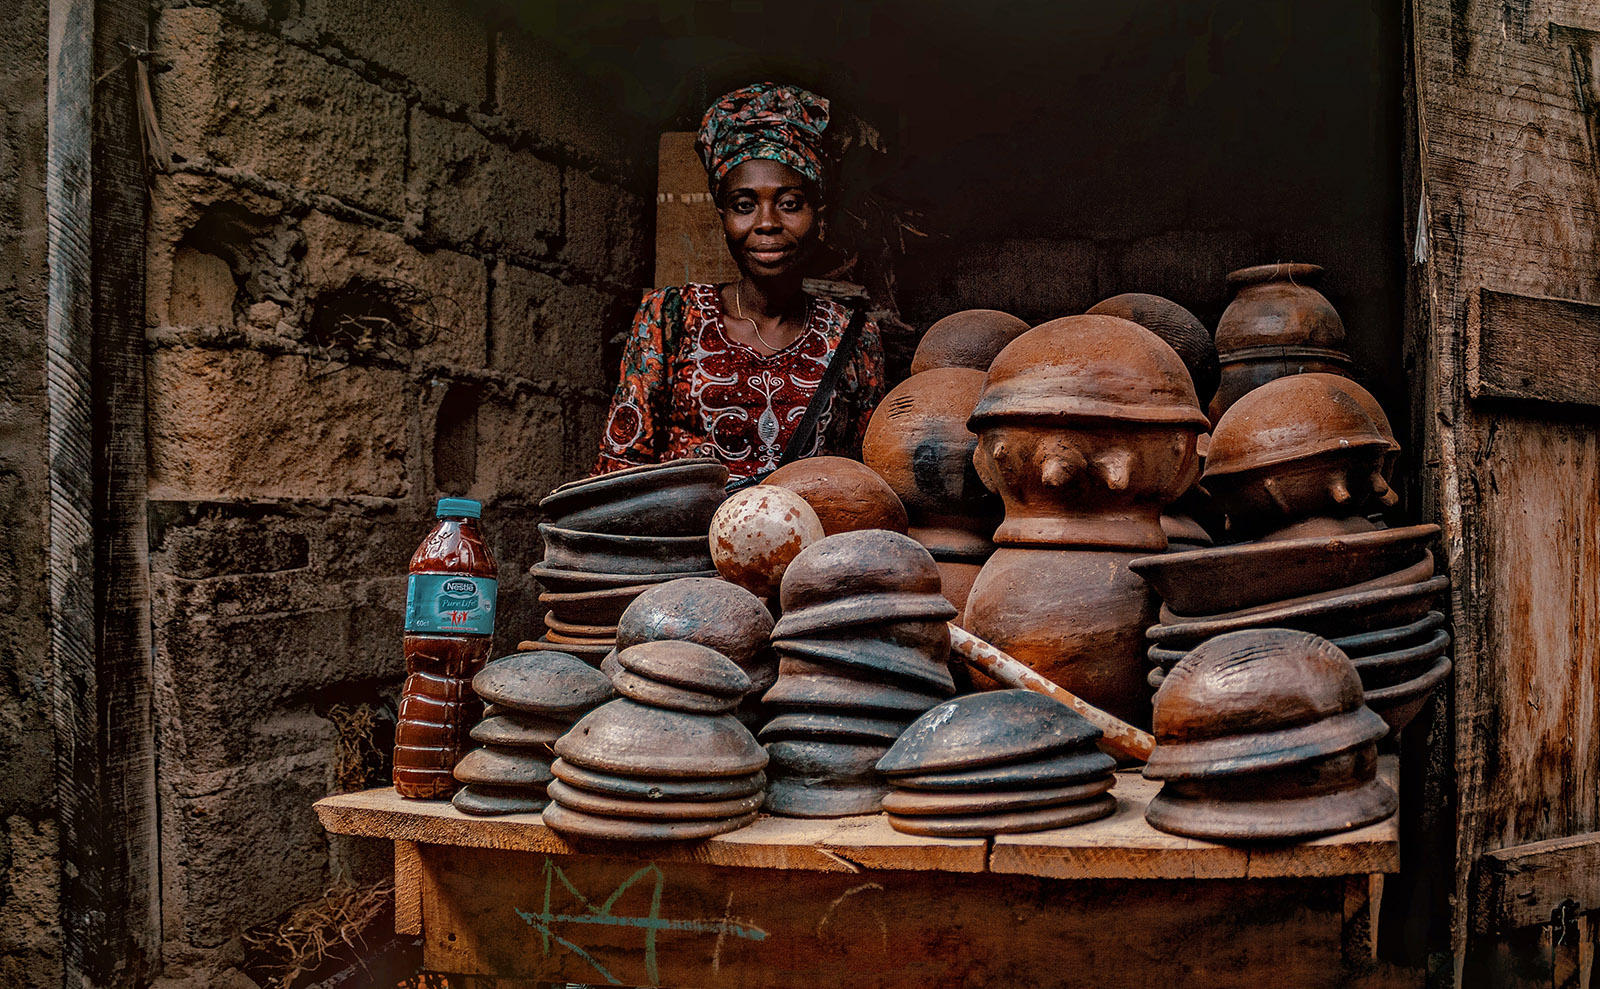 13 Instagrammers That Showcase the Food, Fashion, Fun, and Culture of Nigeria